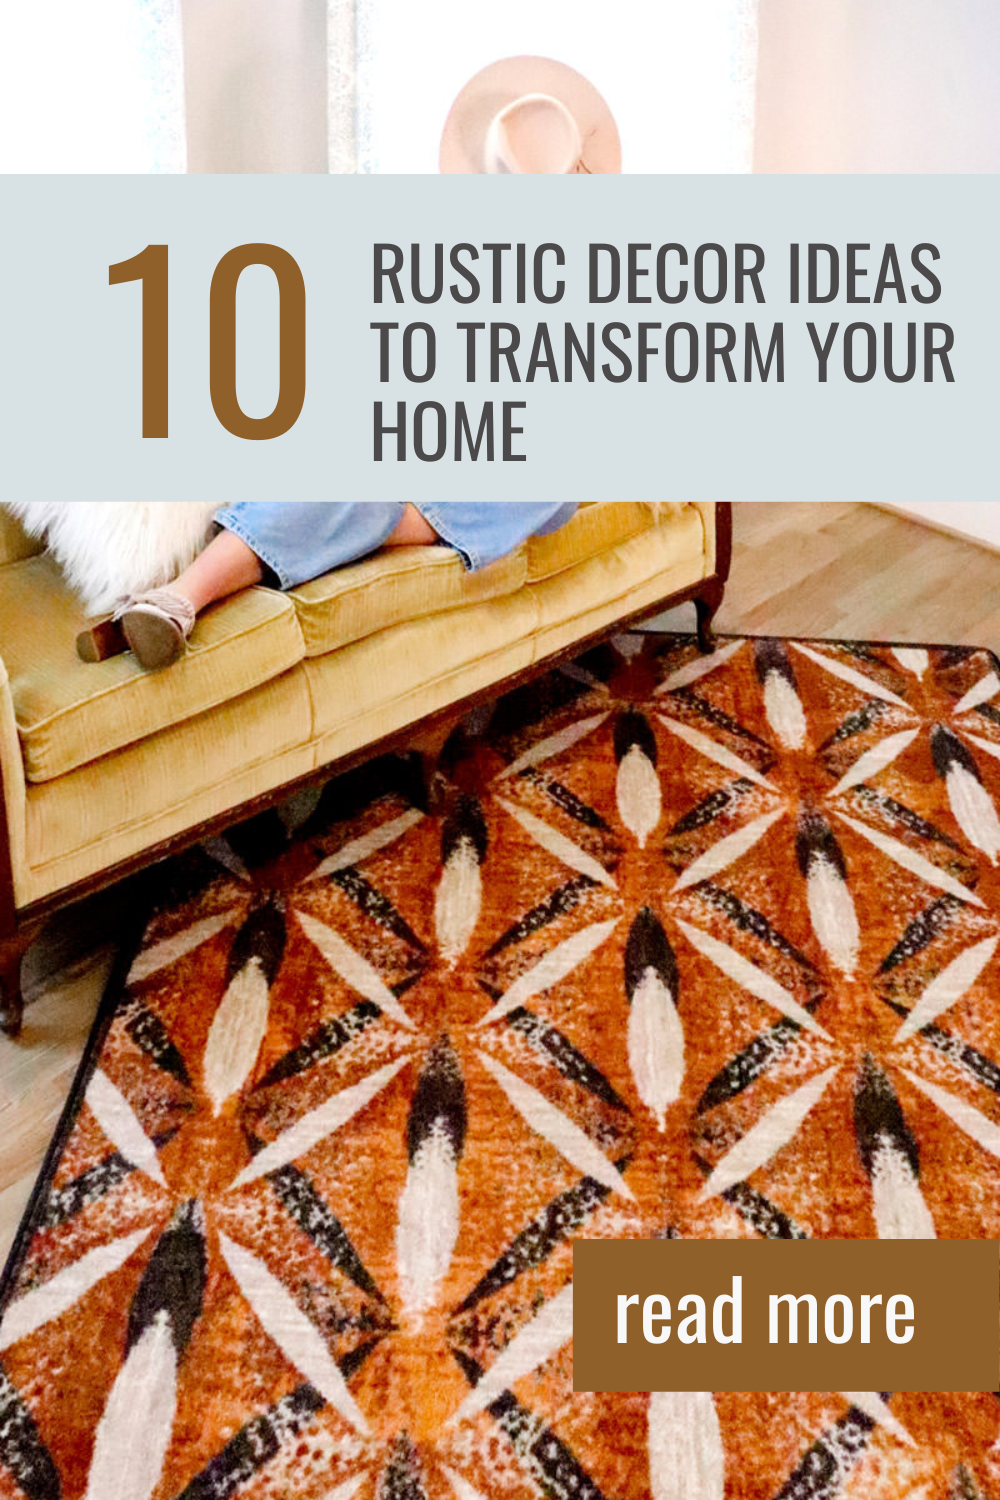 10 Rustic Decor Ideas to Transform Your Home